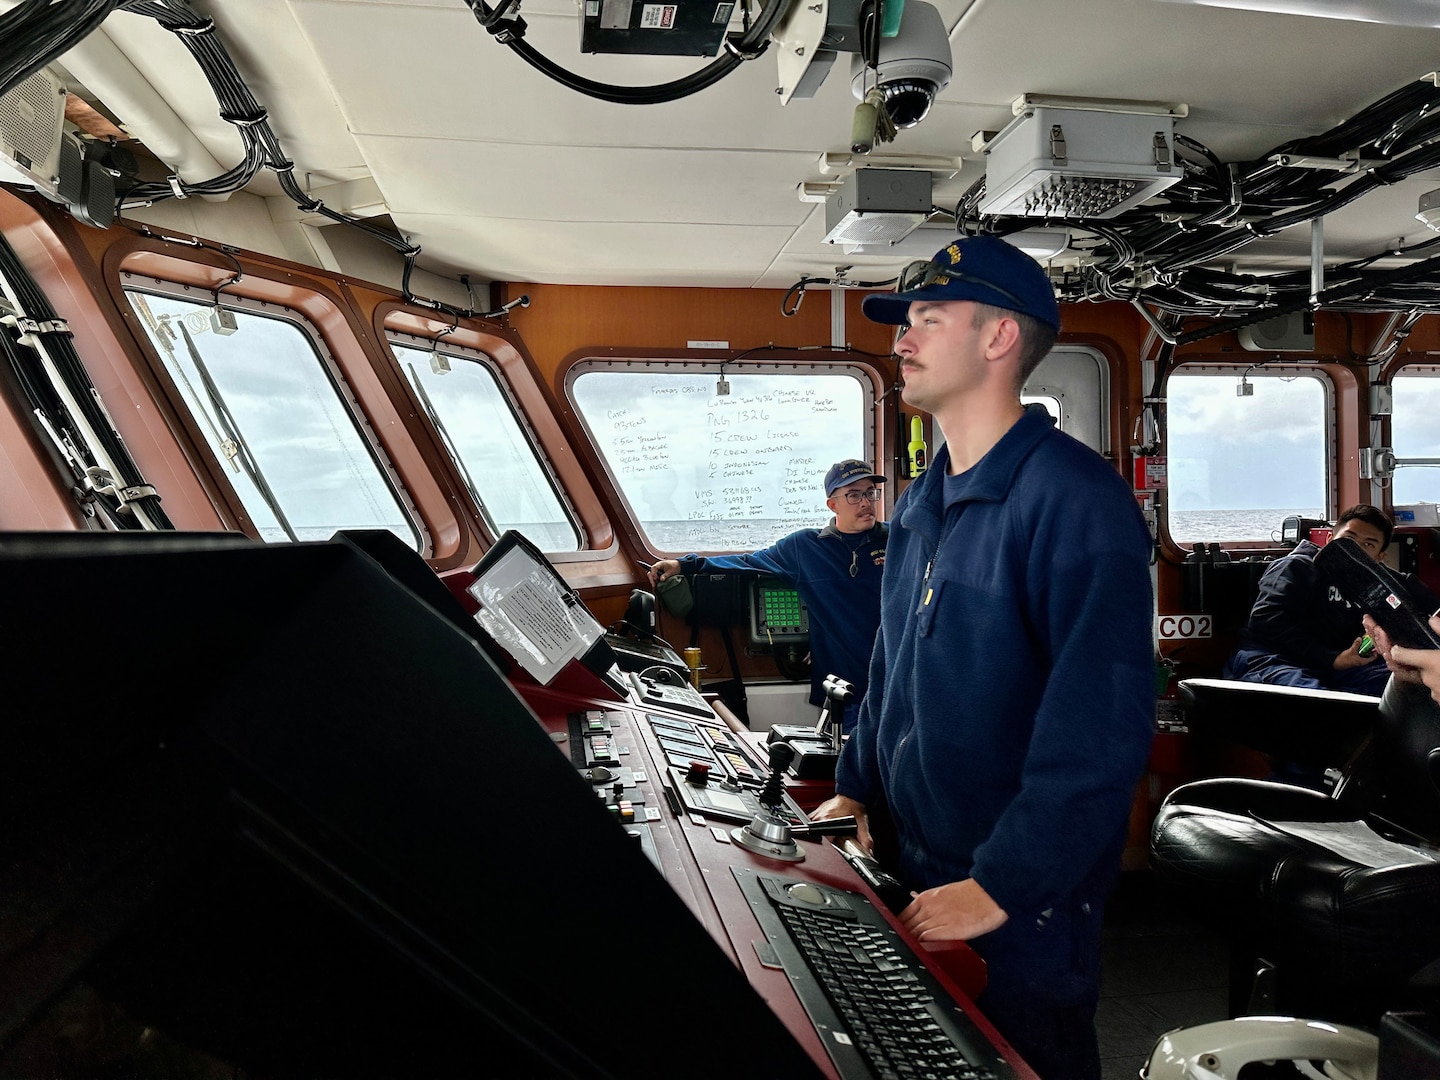 Ensign Peyton Phillips at the helm of USCGC Myrtle Hazard (WPC 1139) in the Coral Sea off Papua New Guinea on Aug. 23, 2023. The U.S. Coast Guard was in Papua New Guinea at the invitation of the PNG government to join their lead in maritime operations to combat illegal fishing and safeguard marine resources following the recent signing and ratification of a bilateral maritime law enforcement agreement between the United States and Papua New Guinea. (U.S. Coast Guard photo by Chief Warrant Officer Sara Muir)